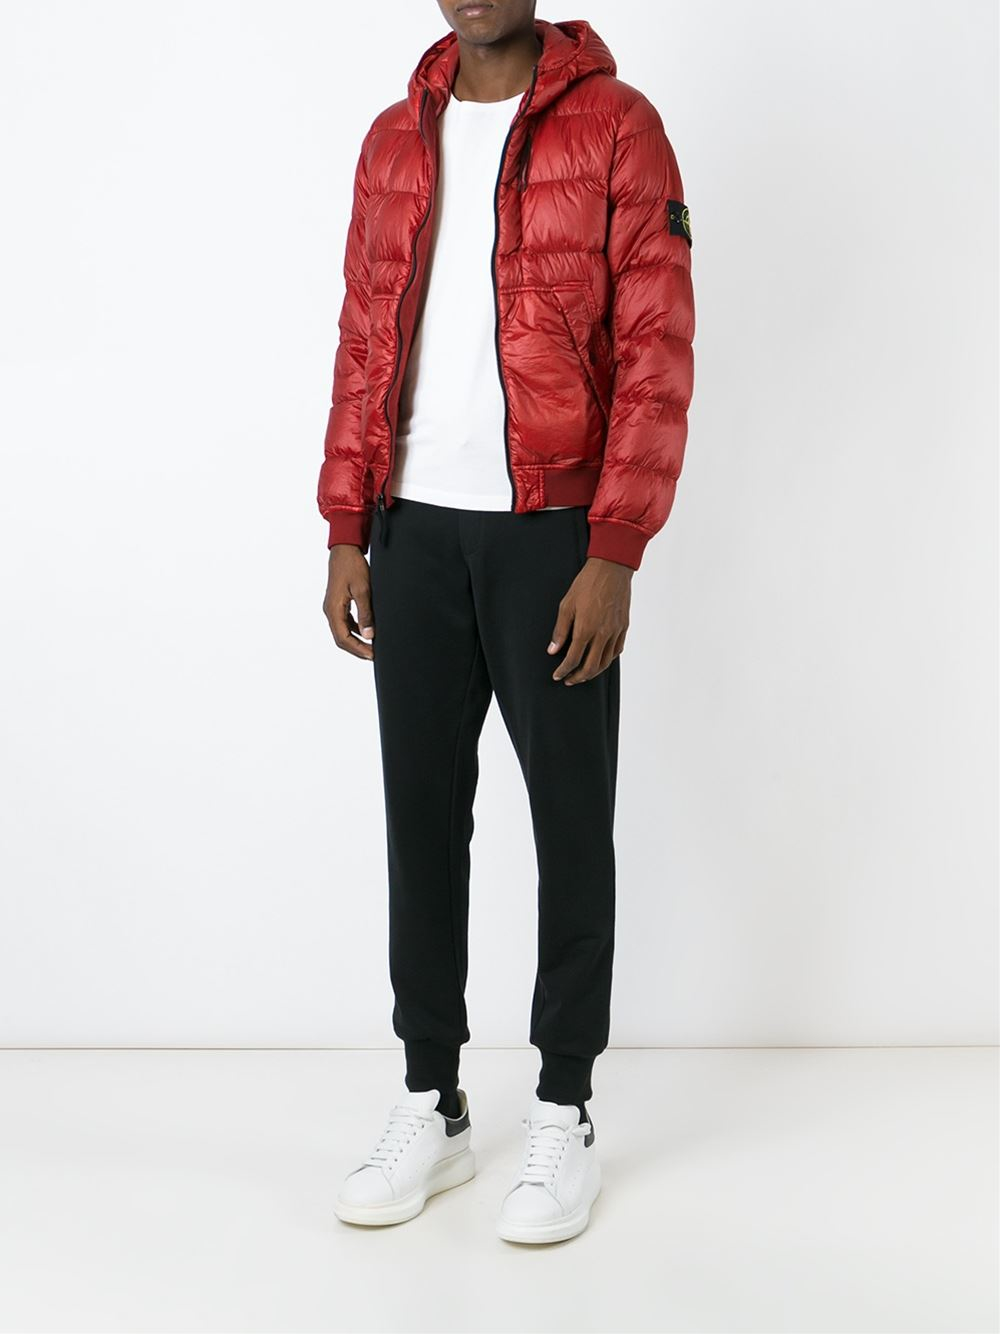 Stone Island Padded Hooded Jacket in Red for Men - Lyst